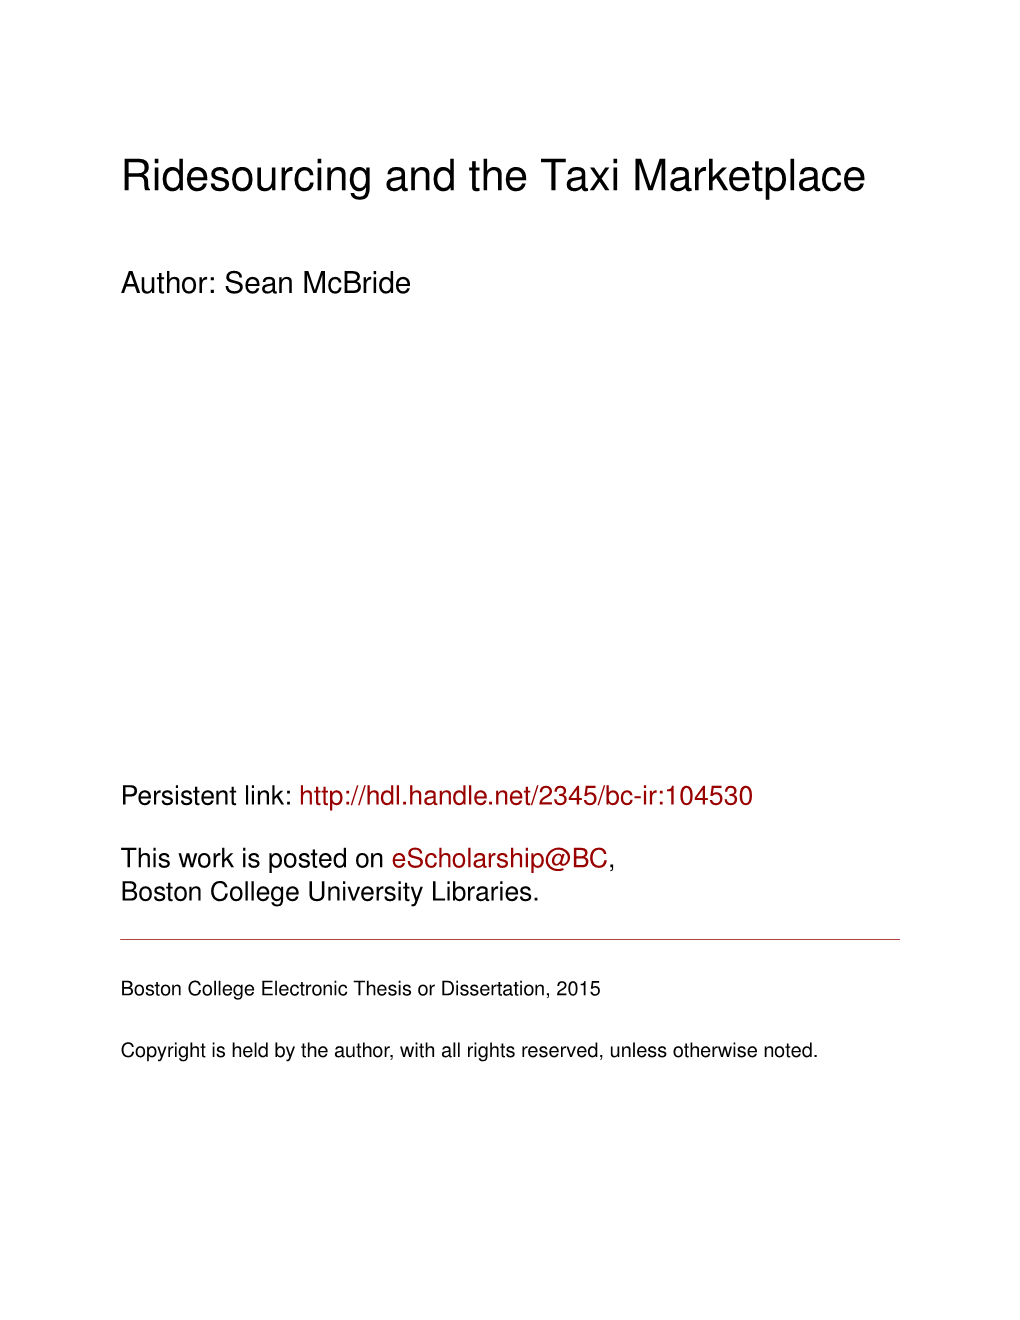 Ridesourcing and the Taxi Marketplace